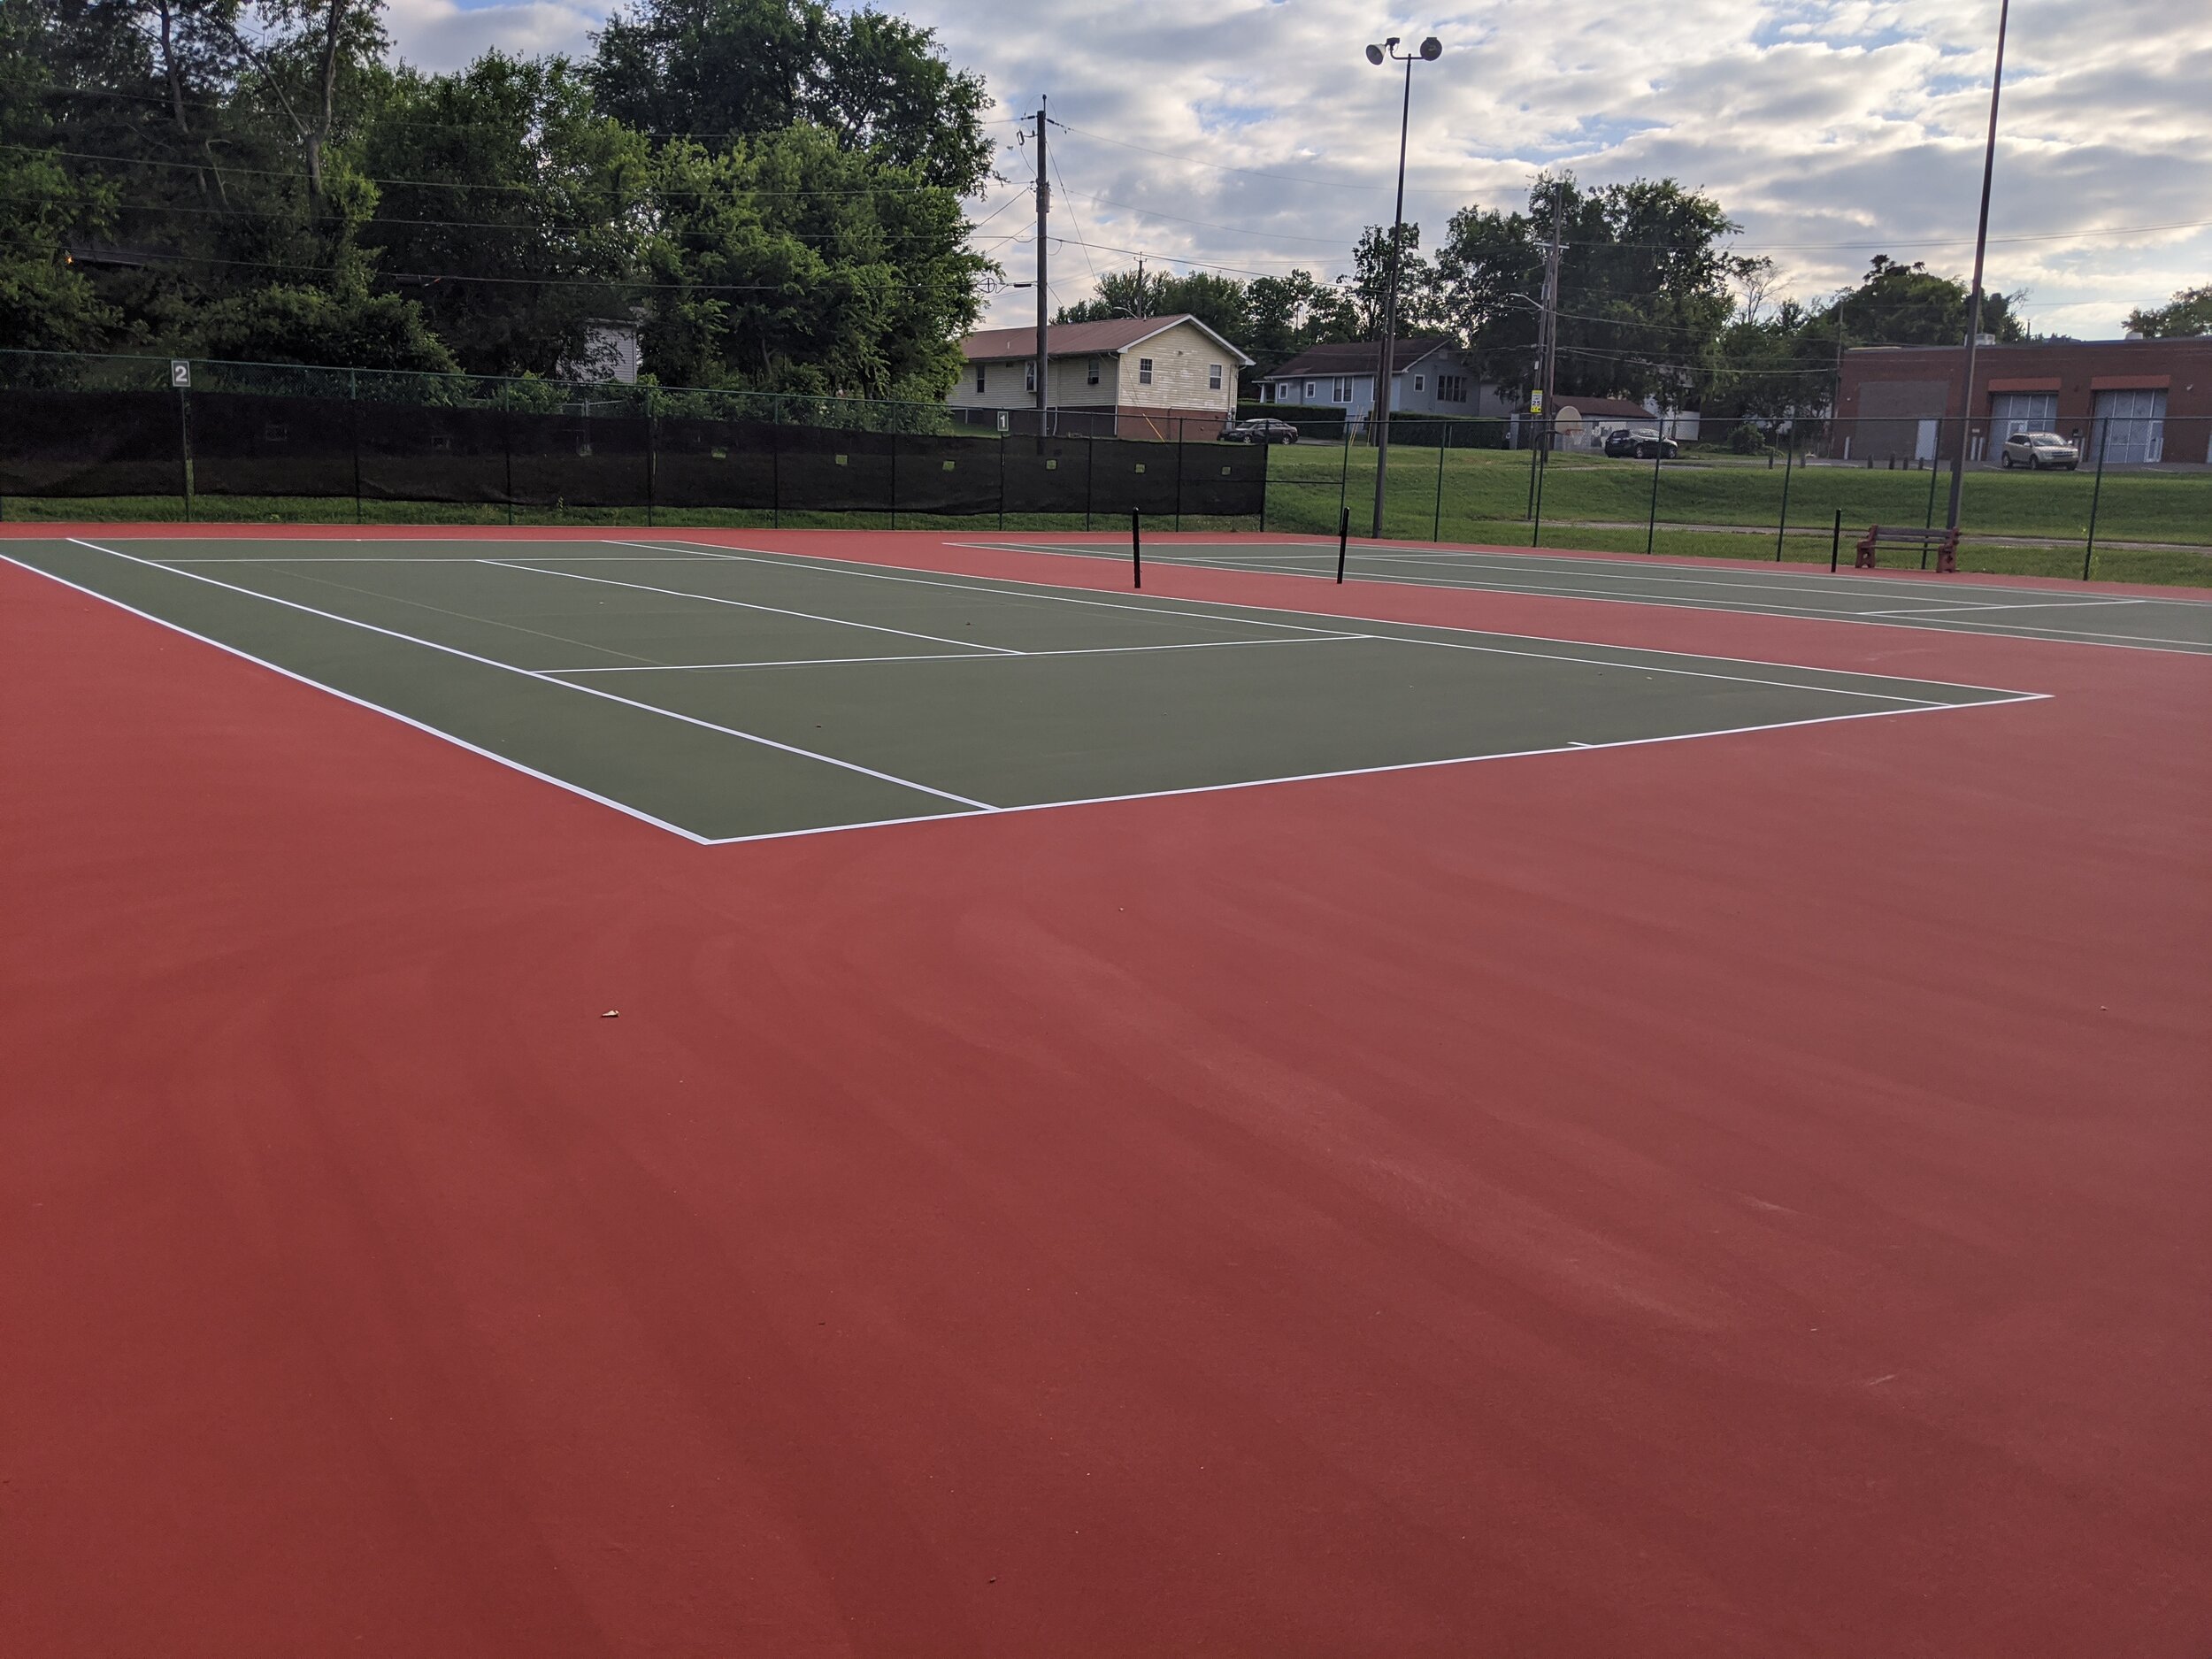 Court resurface completed June 2020